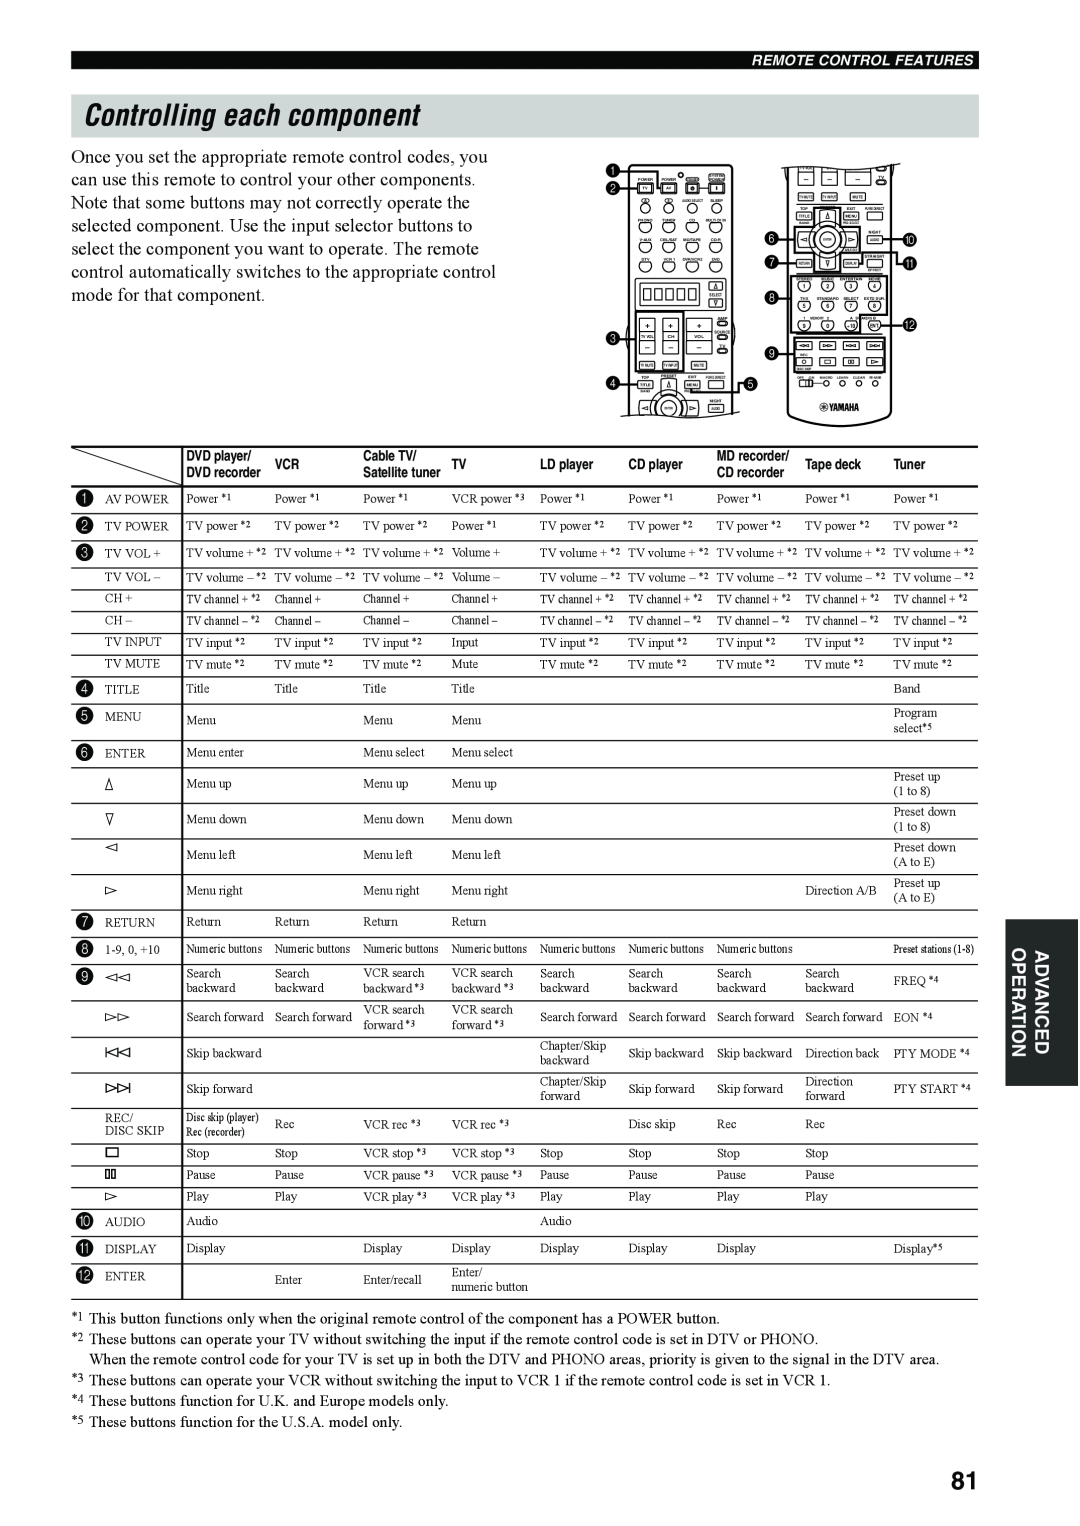 Yamaha RX-V4600 owner manual Controlling each component, 9 ll 